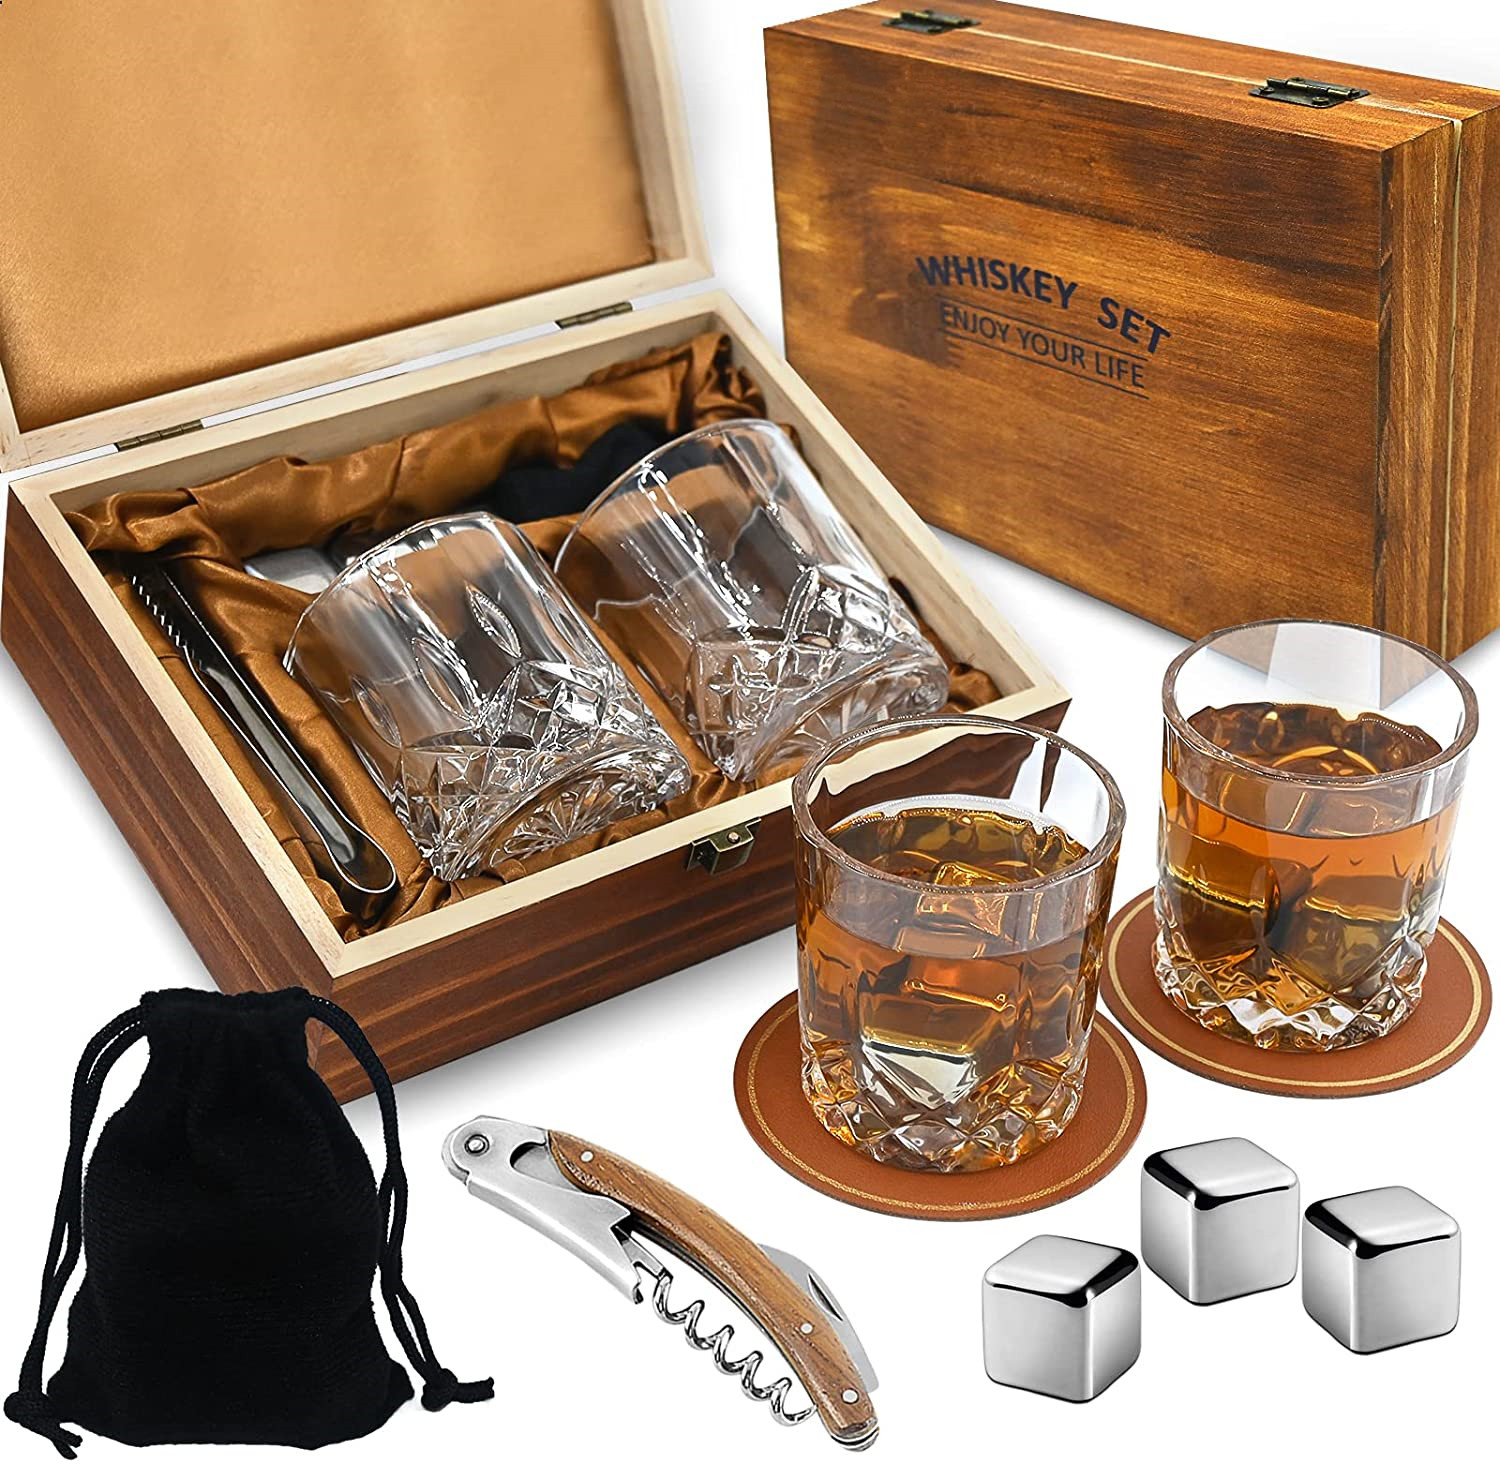 40th Birthday Gifts for Him, Men's Birthday Gifts Ideas, Bourbon Gifts for  Whiskey Lovers Handmade Crafted Wood Box,12 OZ Whisky Glass, Whiskey Stones  Gifts for Husband Gift for Man, Anniversary Gifts :